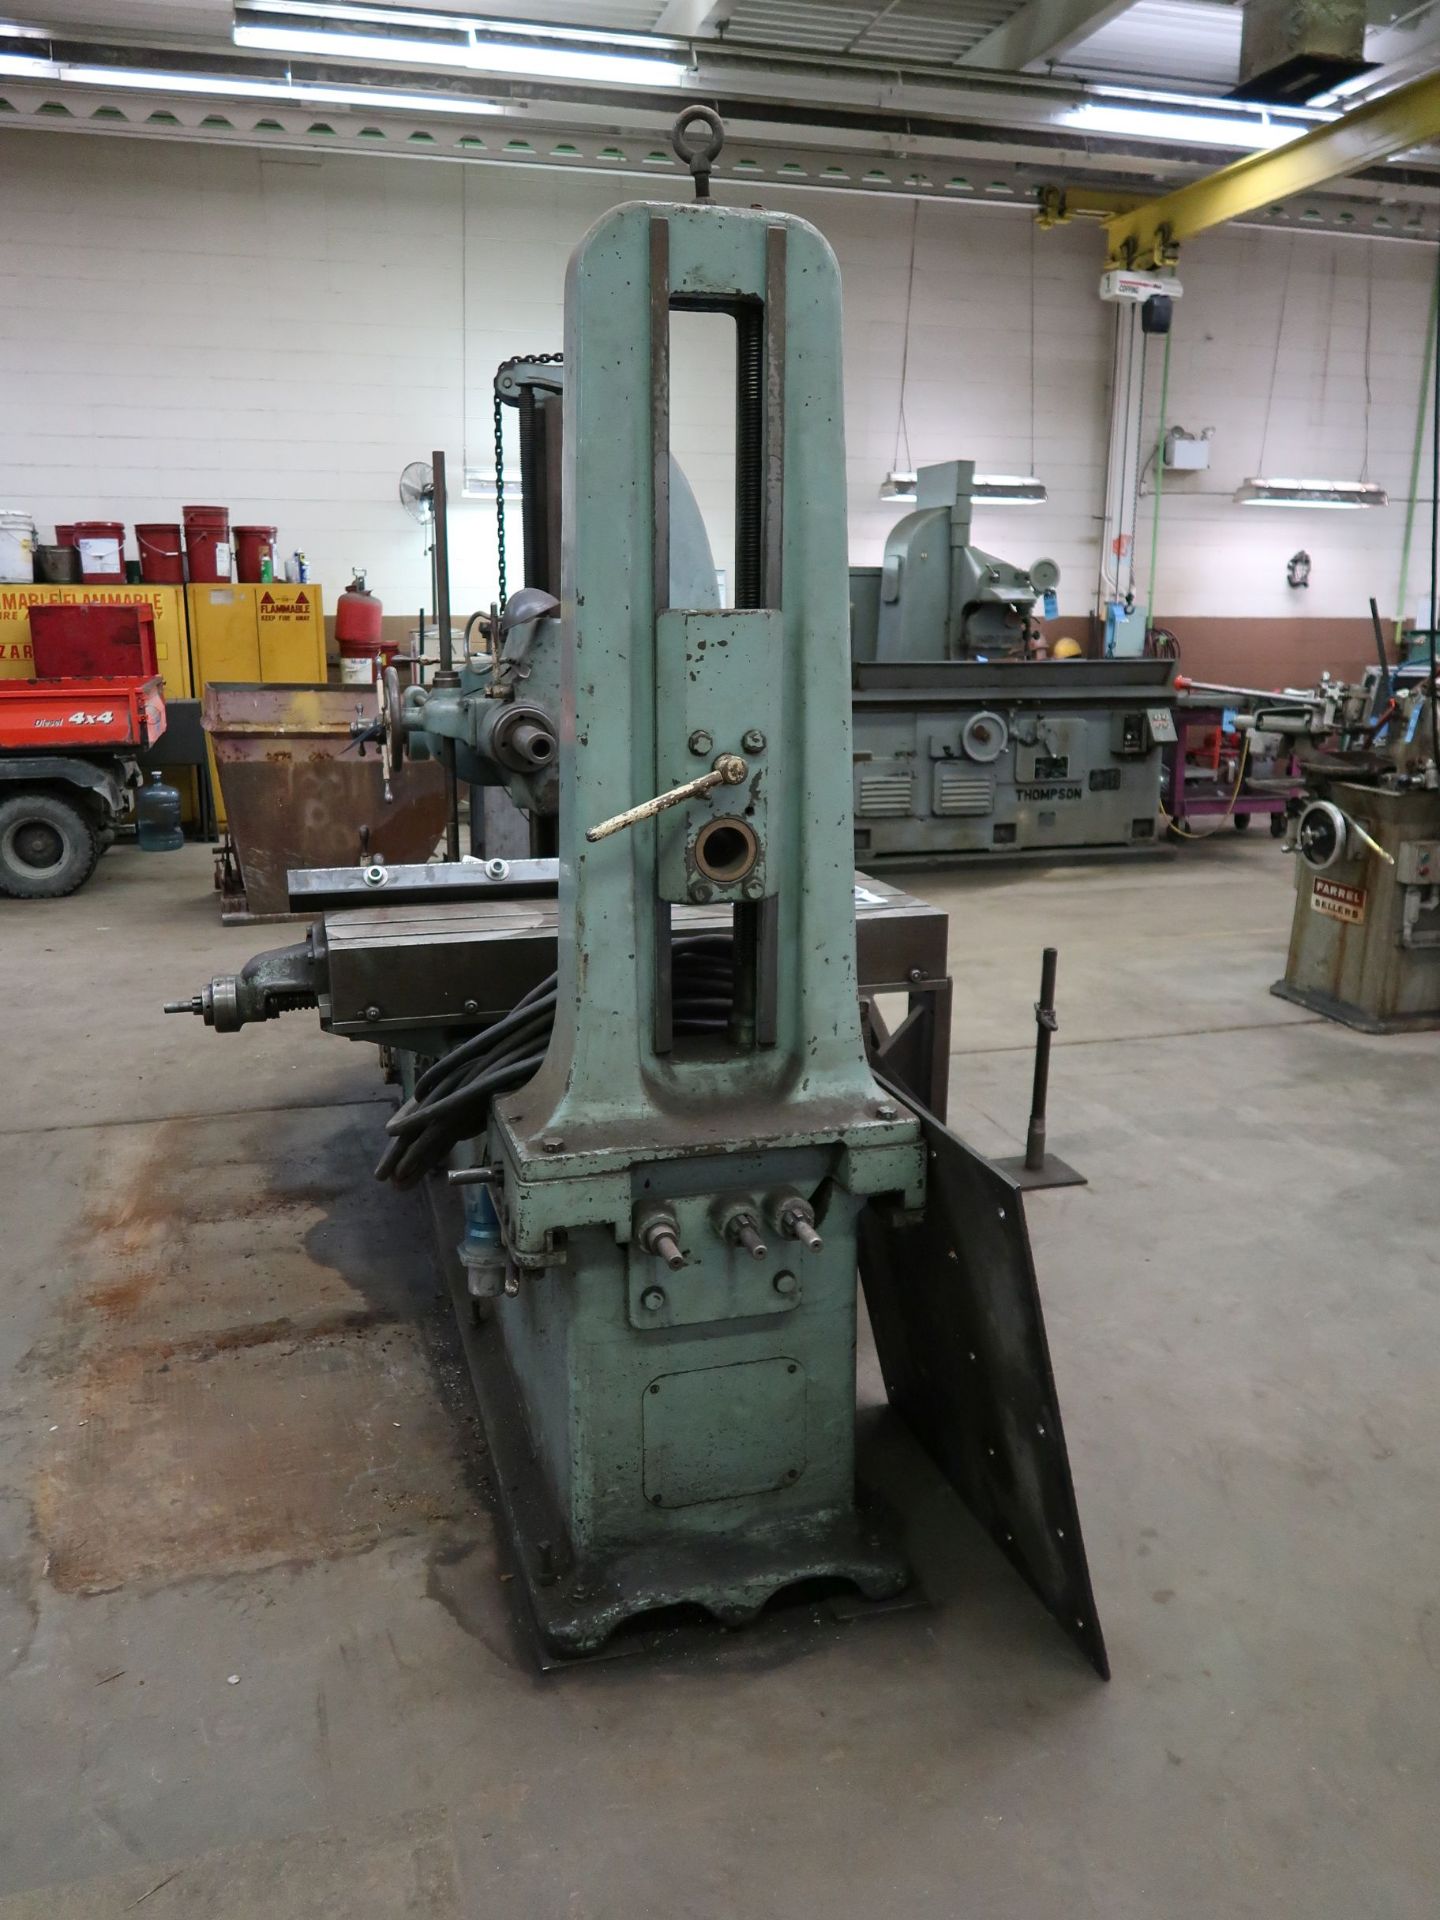 3" LUCAS NO. 31 HORIZONTAL BORING MILL, SPINDLE SPEED 15-200 RPM, 24" X 48" T-SLOTTED TABLE - Image 2 of 11